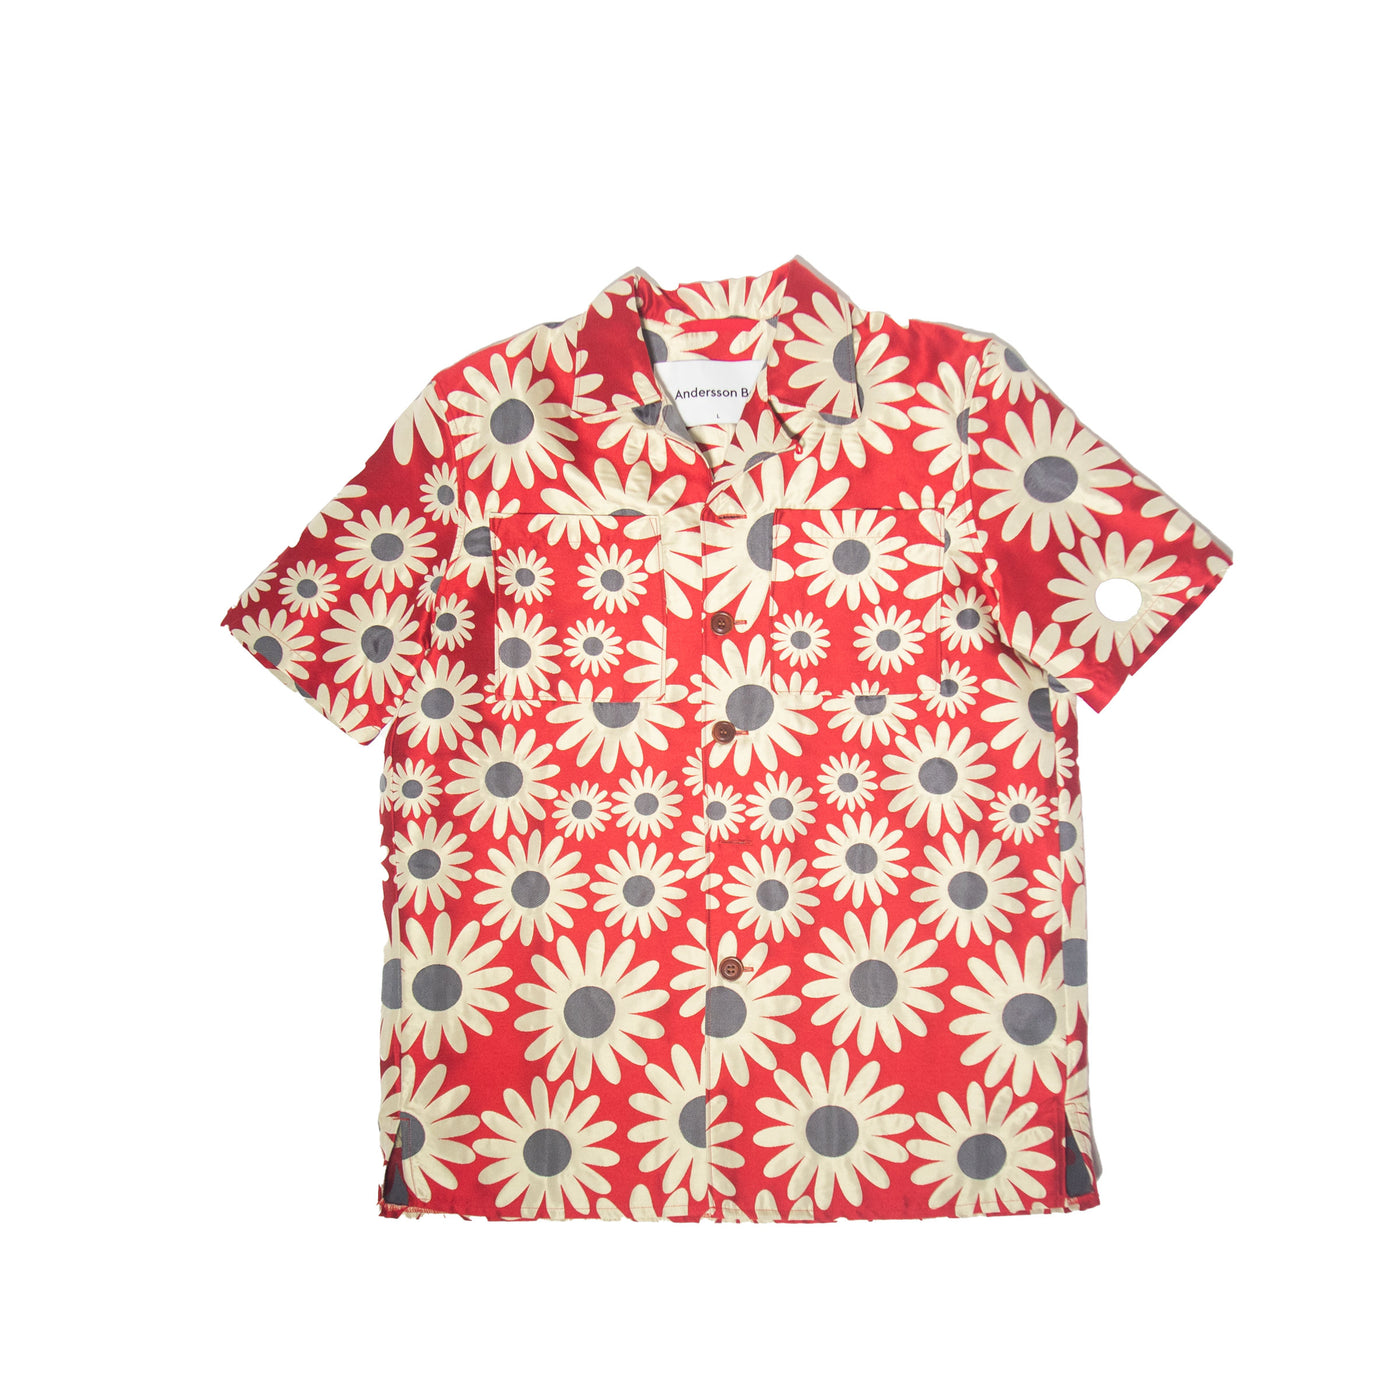 ANDERSSON BELL DAISY JACQUARD SHIRT